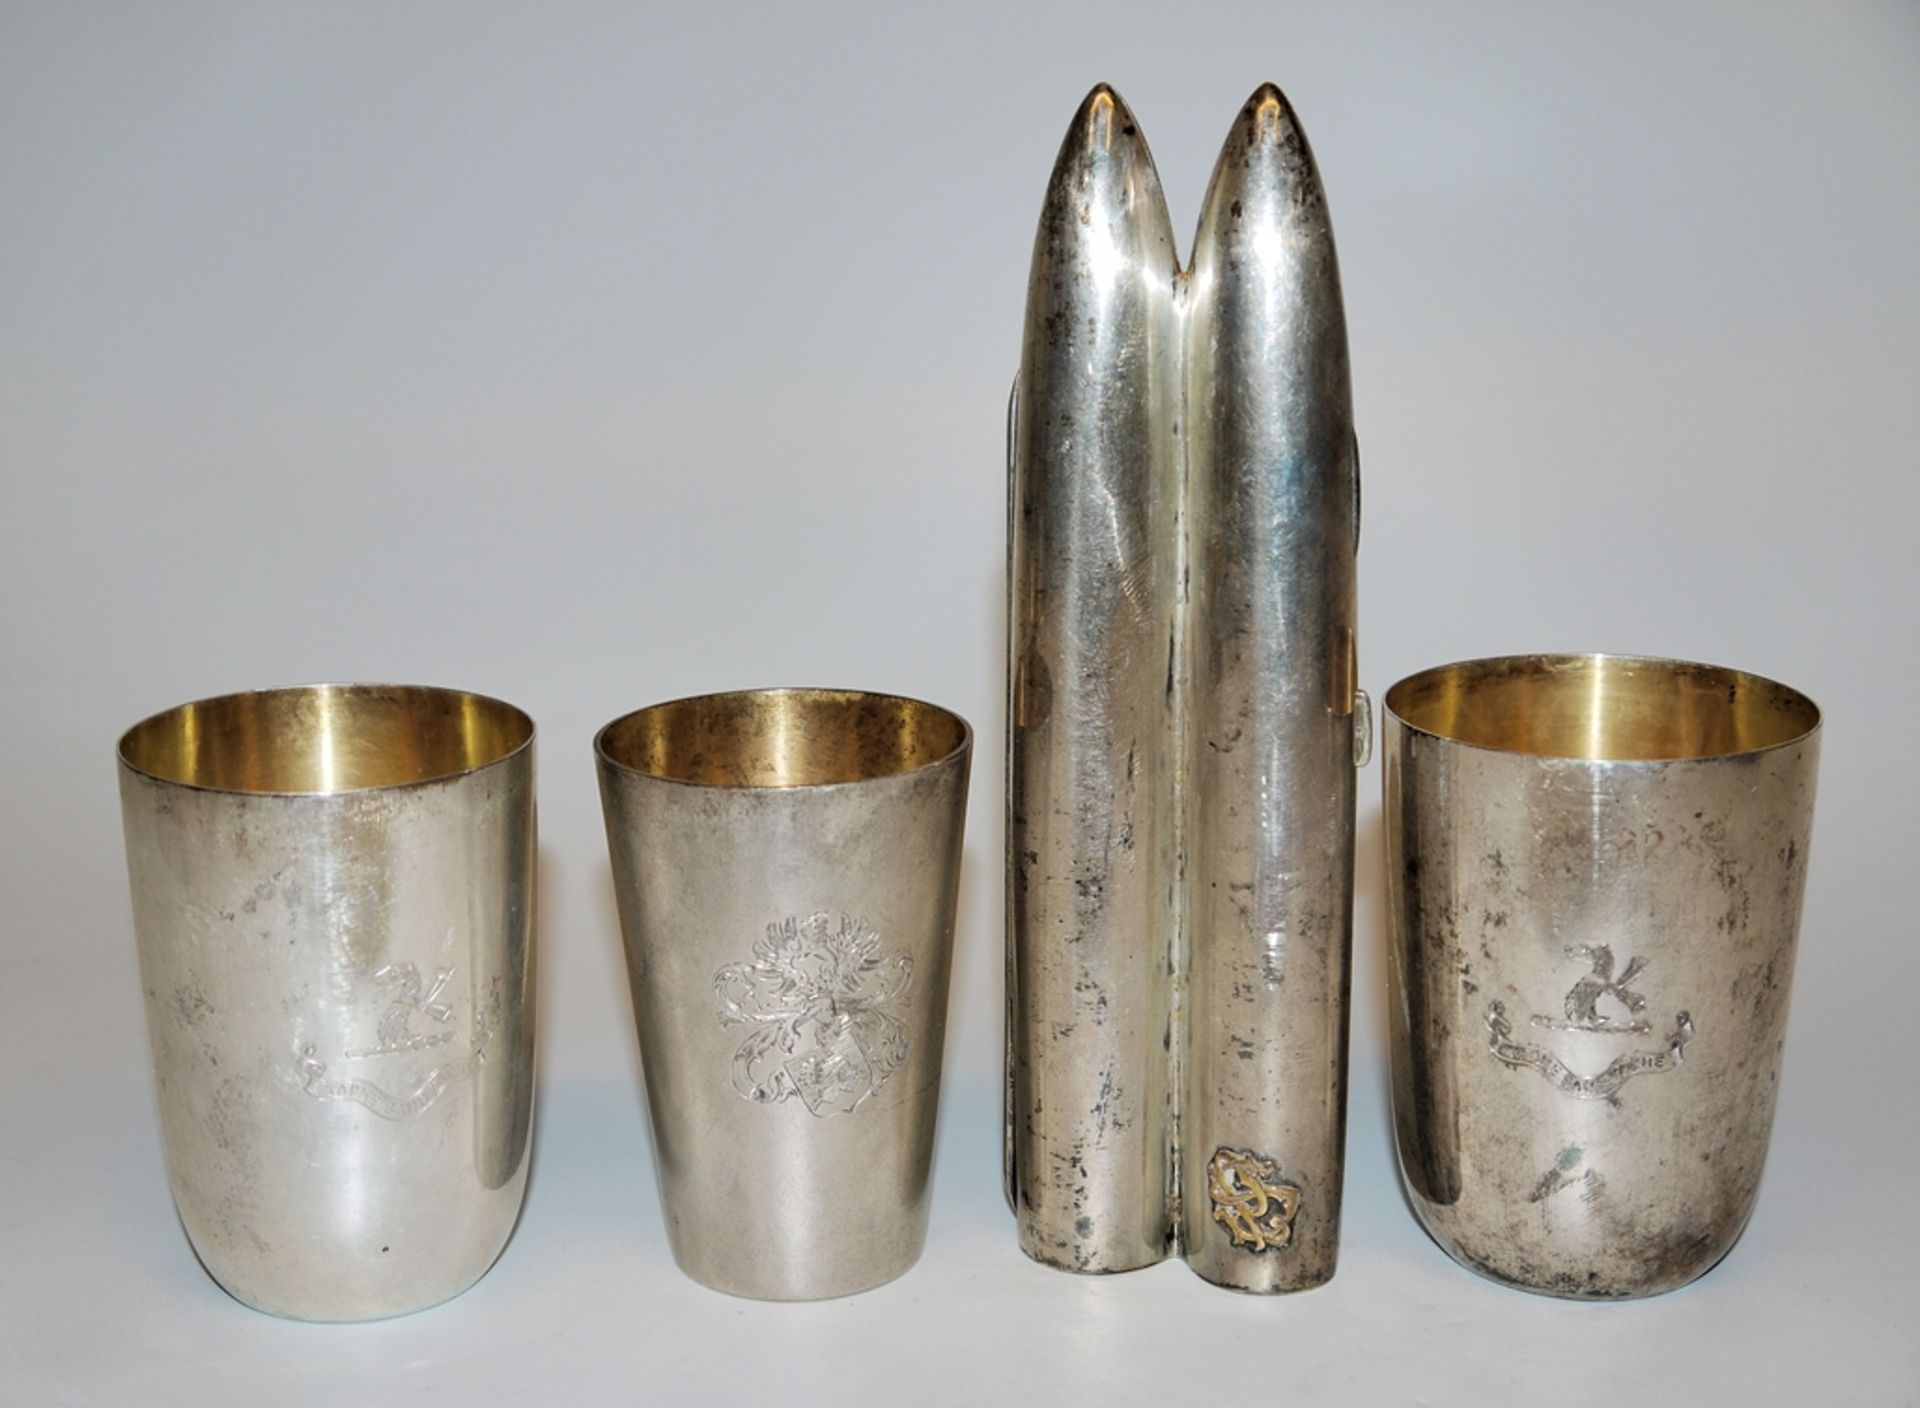 Three silver mugs and a cigar case from an East Prussian family estate